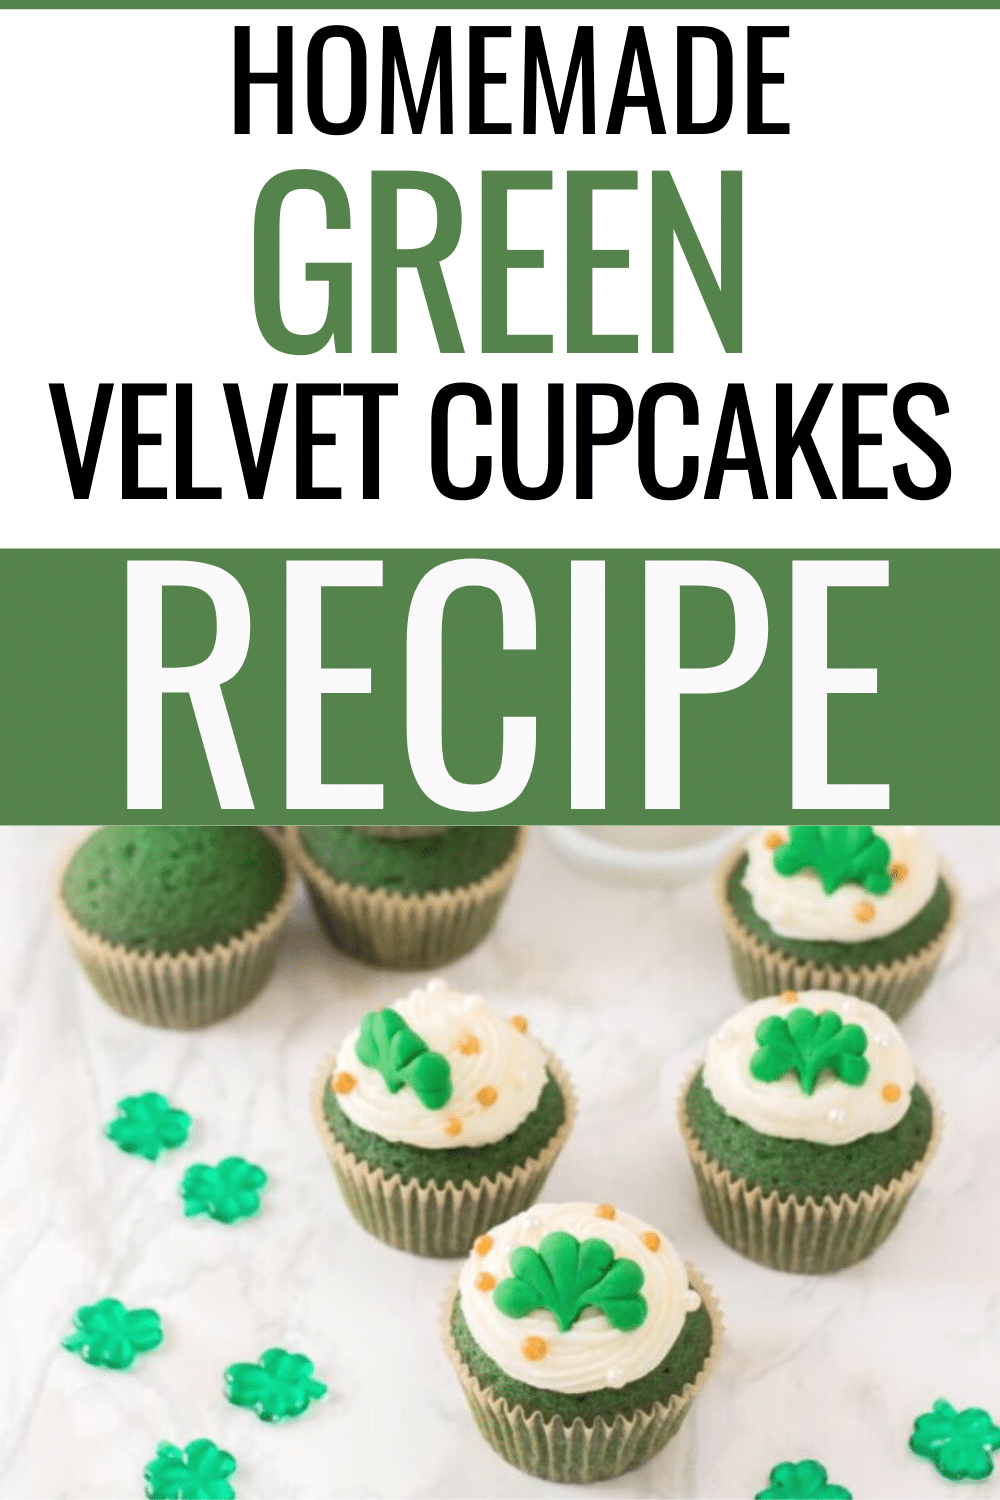 This Homemade Green Velvet Cupcakes Recipe is about to make all your cupcake dreams come true. Such a fun way to celebrate St. Patrick's Day! #stpatricksday #cupcakes #greenvelvet #recipe via @wondermomwannab